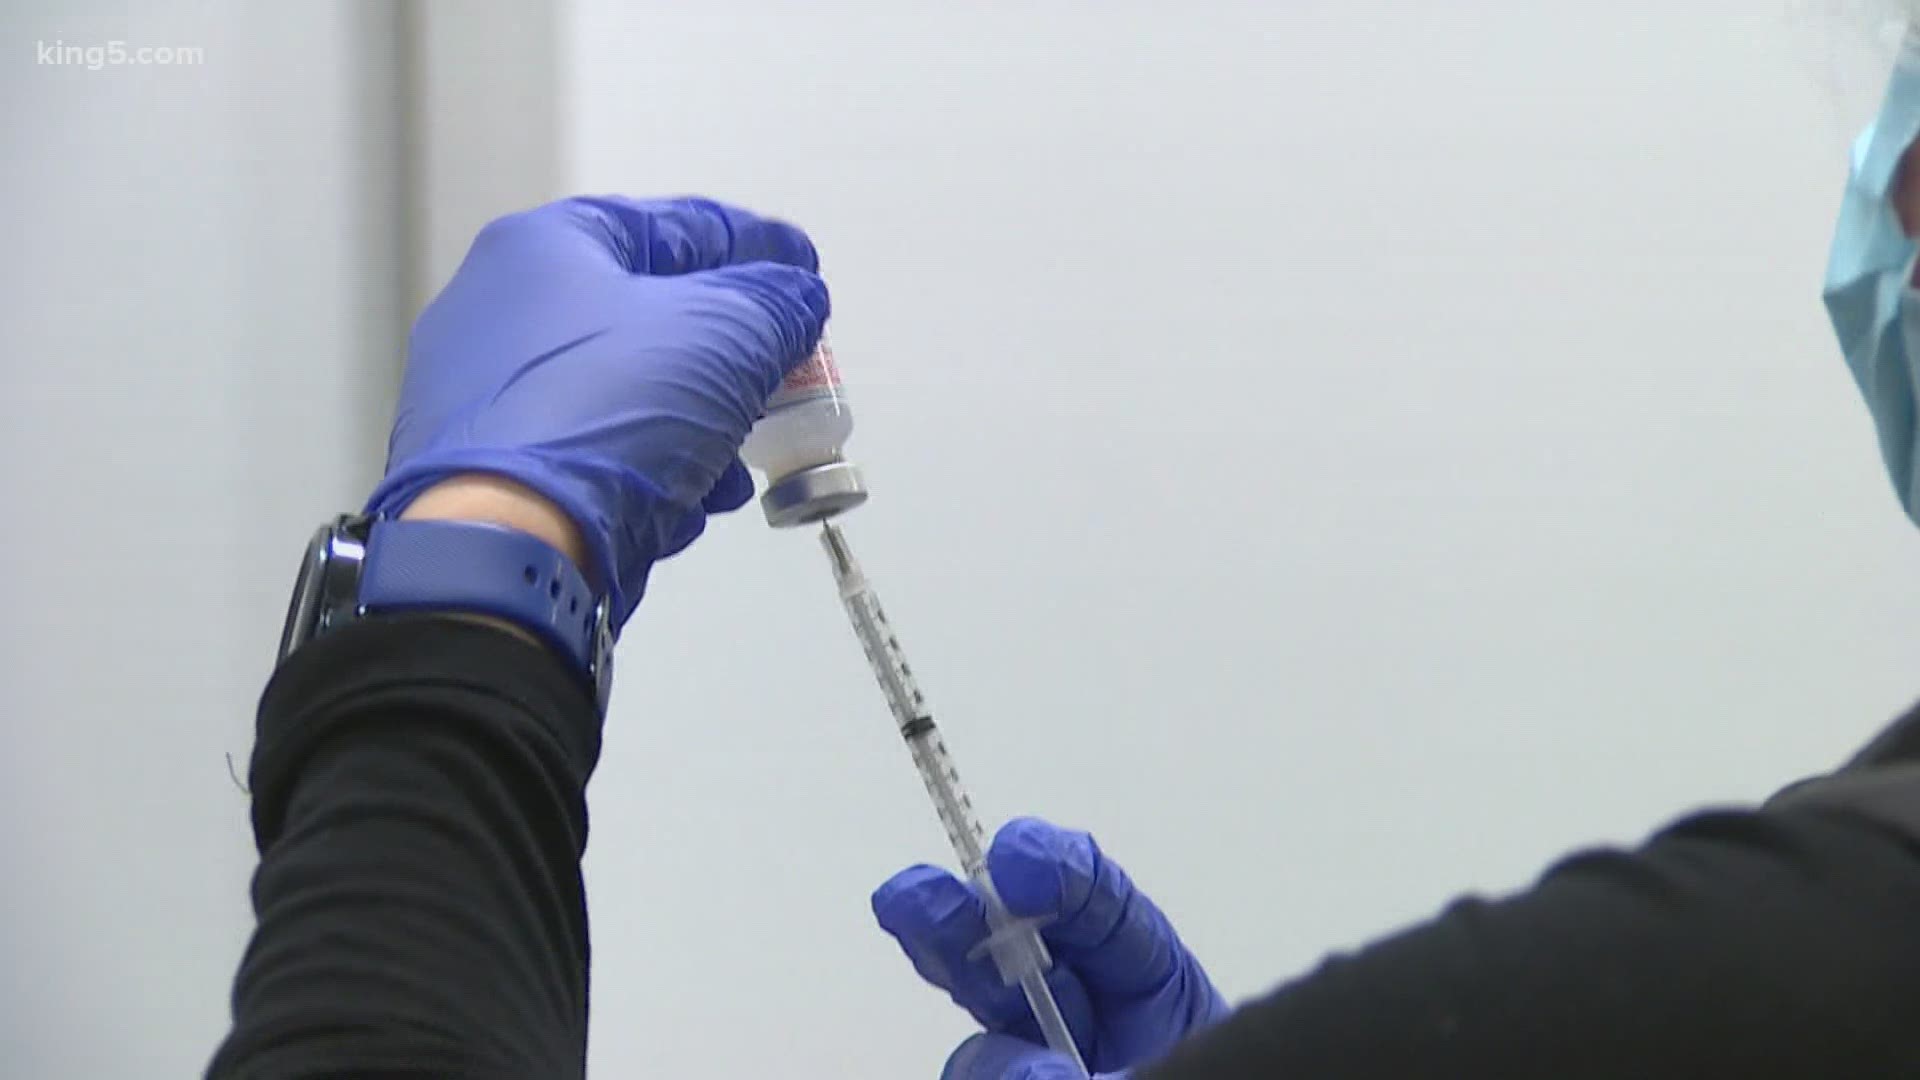 About 90% of the state's vaccine supply for this week got caught in winter weather shipping delays.